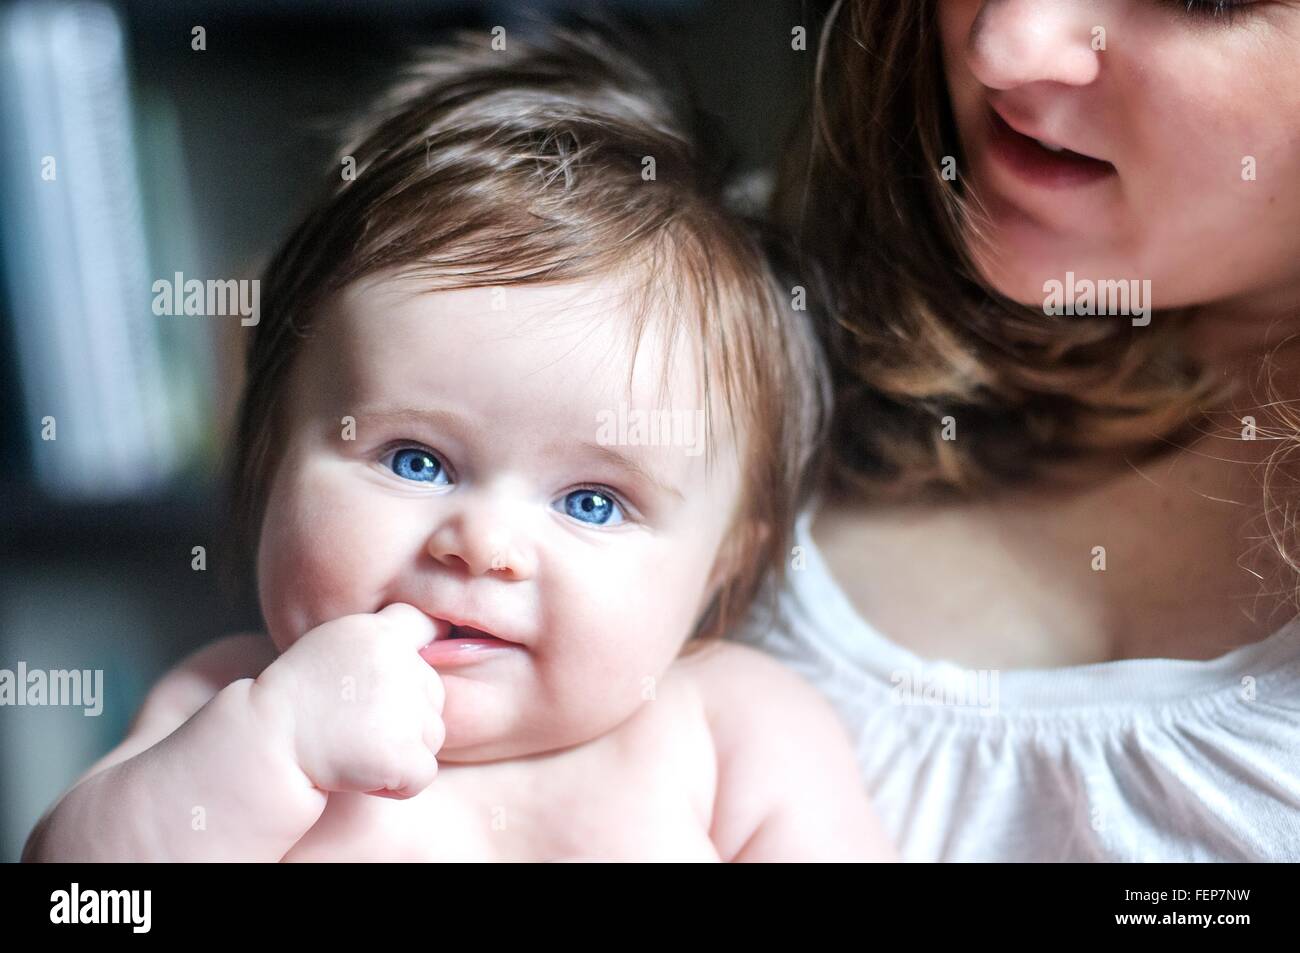 Mother holding baby daughter with finger in mouth looking at camera smiling Banque D'Images